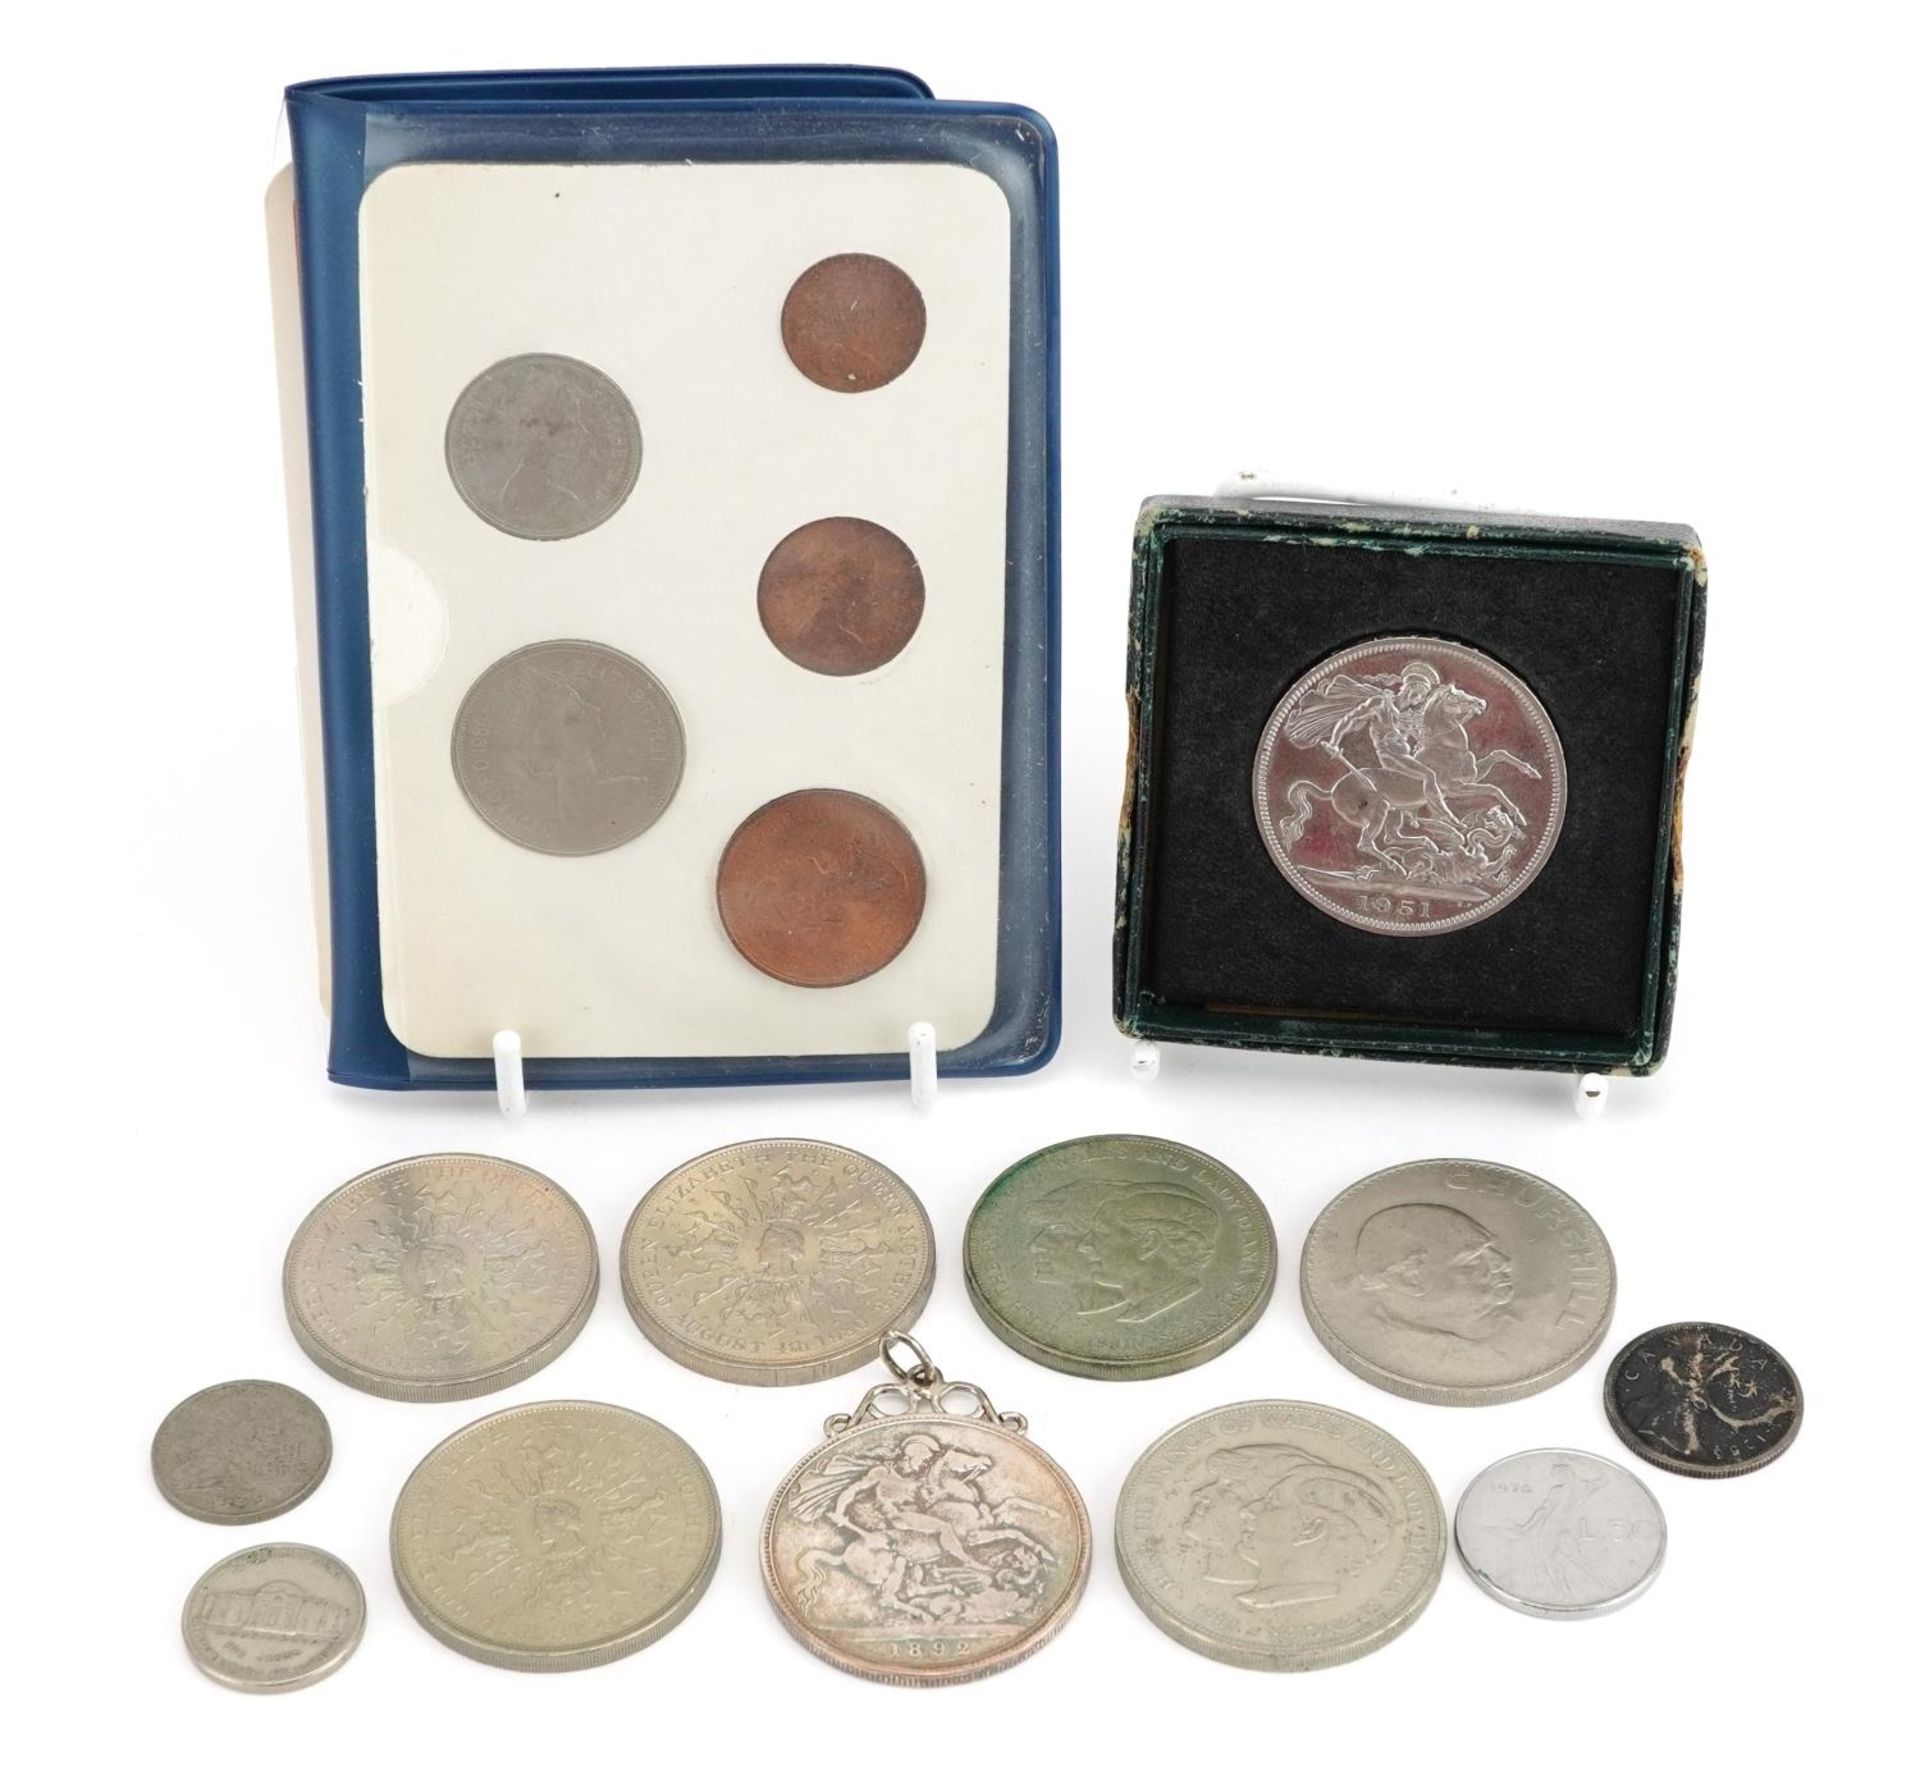 Victorian and later British coinage including 1892 silver crown : For further information on this